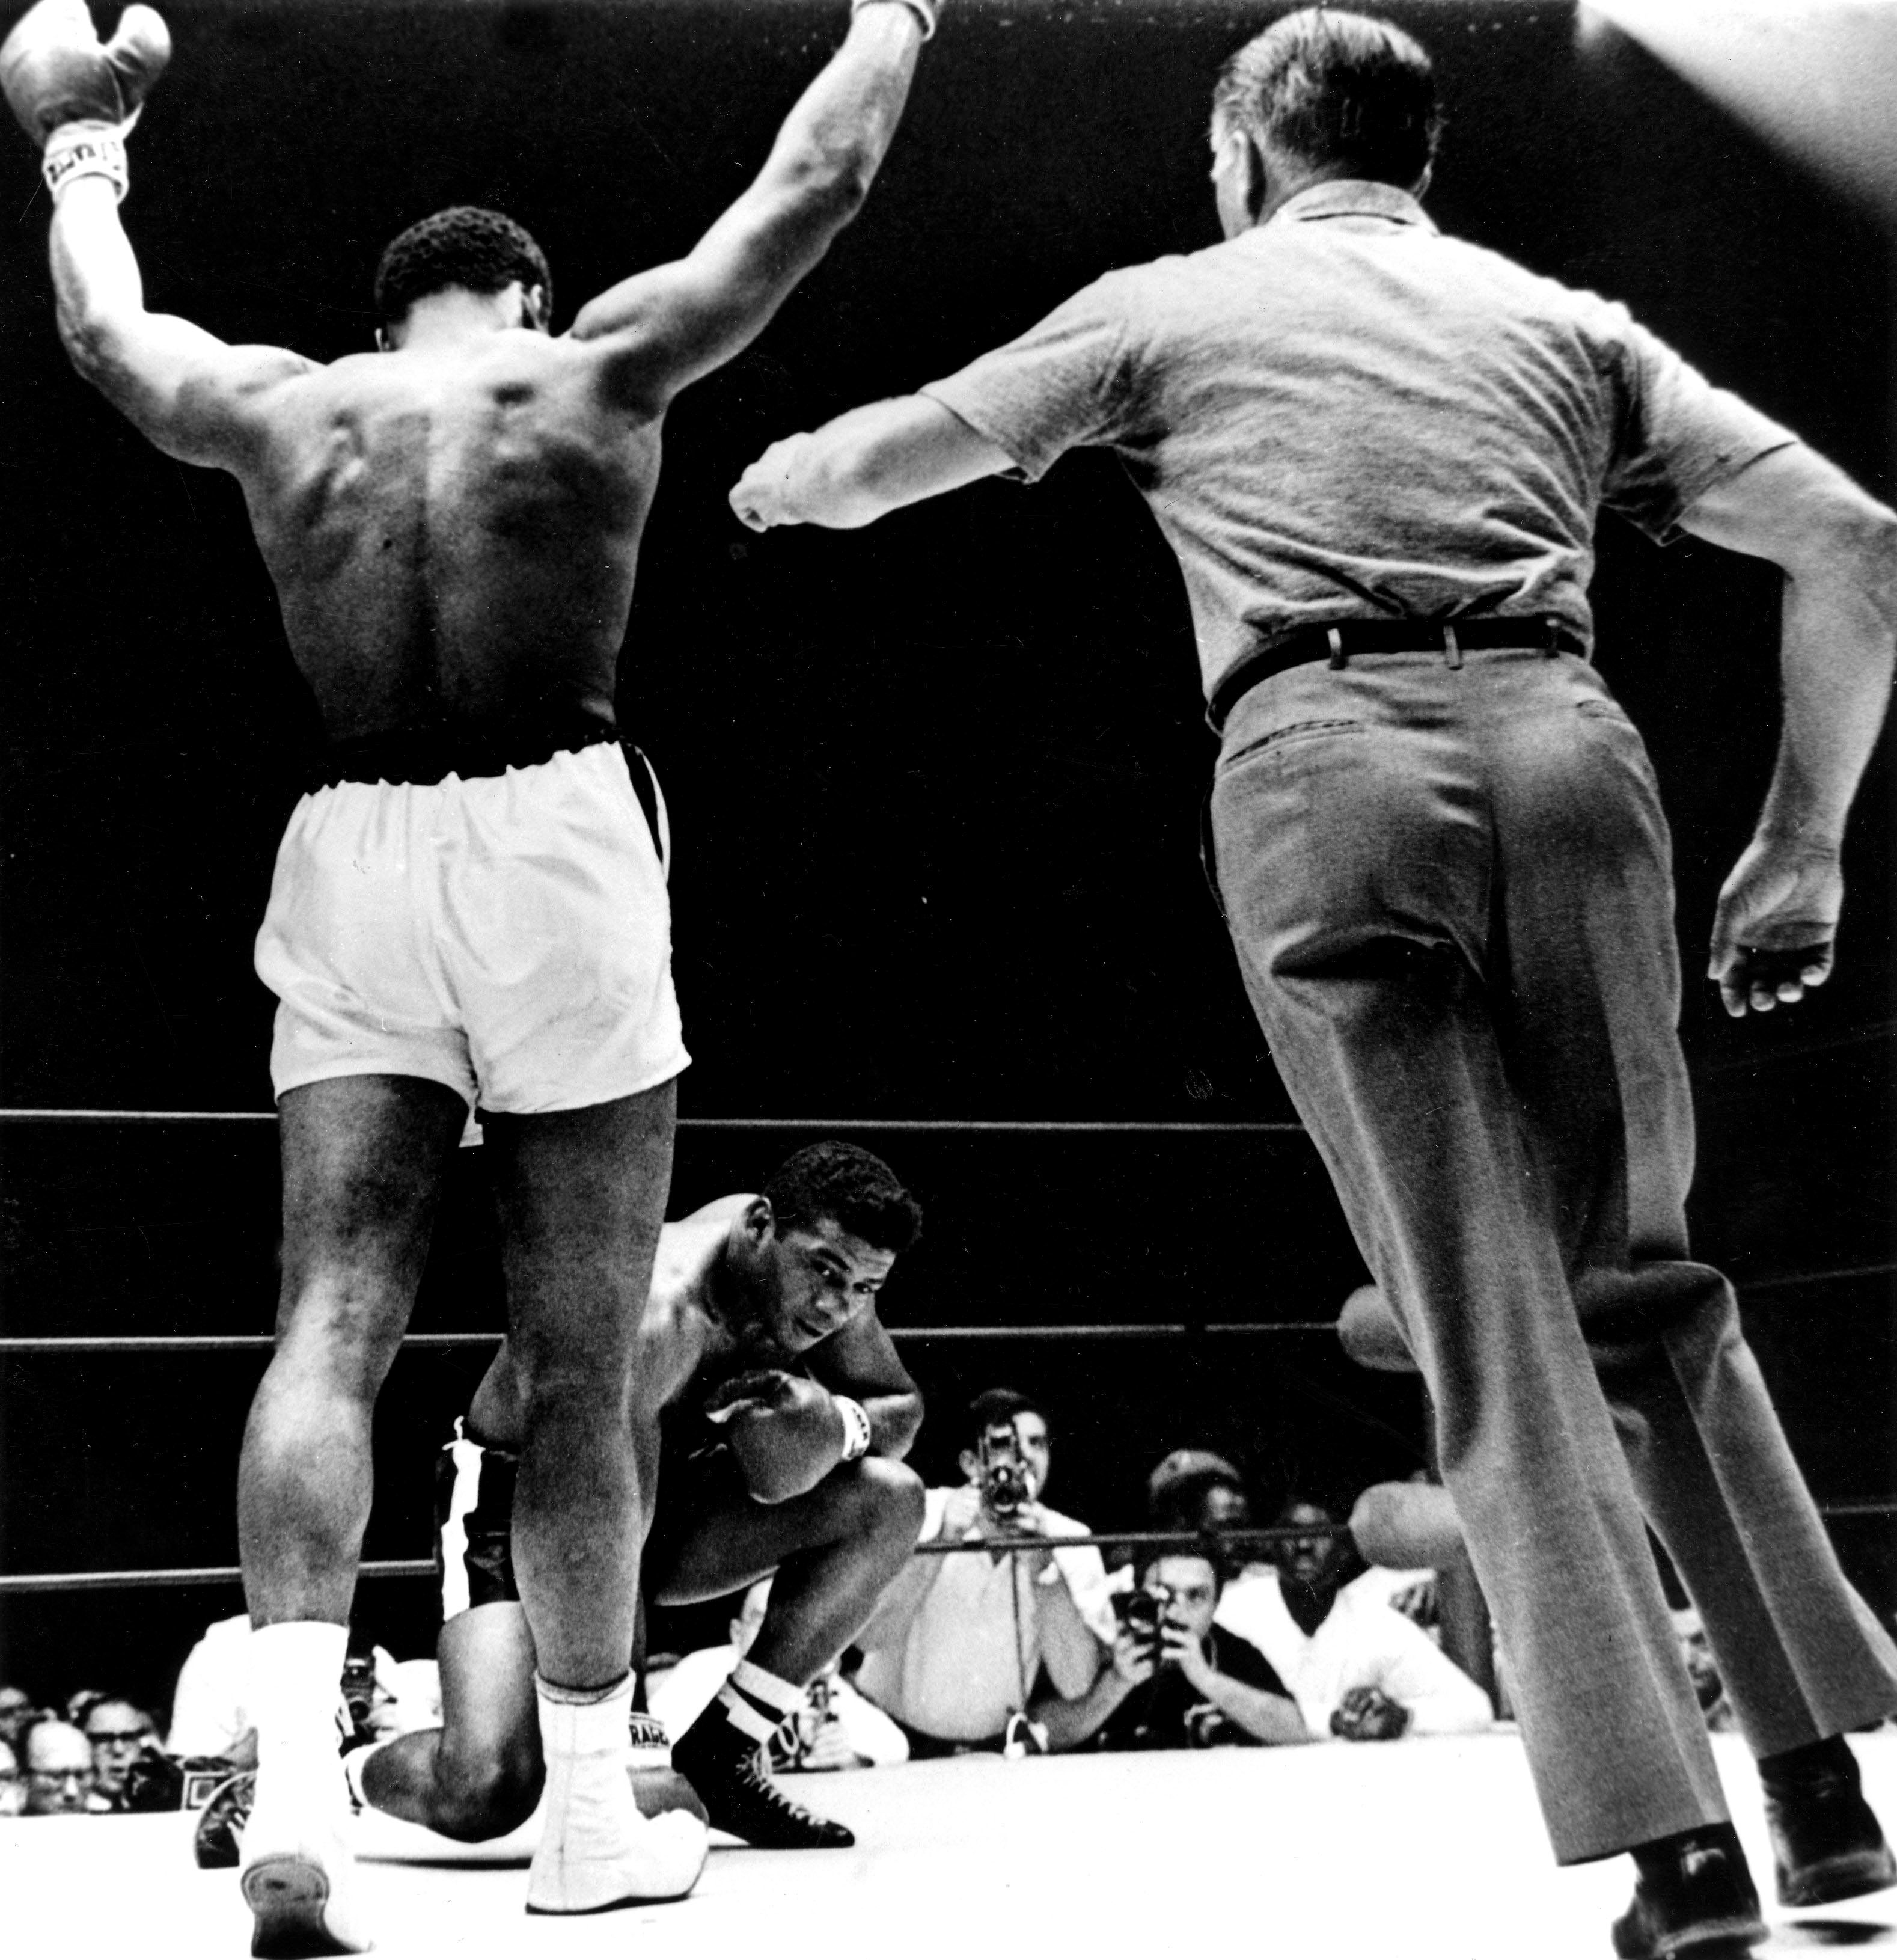 Cassius Clay with arms raised, is waived to the neutral corner as Floyd Patterson (kneeling) takes a mandatory count of eight in the 6th round of their title fight in Las Vegas. Clay won on a technical knock-out in the 12th round to retain his title. The referee, Mr Krause, had to warn Clay for talking to Patterson early in the fight. "Clay tried from the first round to humiliate Patterson", Mr Krause said. "He tortured him with remarks like, 'Come on American, come on white American'". After the fight, Clay showered Patterson with unstinting praise and then typically demanded plenty of credit for himself from the "American Public". Clay spent nearly 15 minutes in the ring after the fight delivering a long impassioned oration, before finally heading for his dressing room. 22nd November 1965.